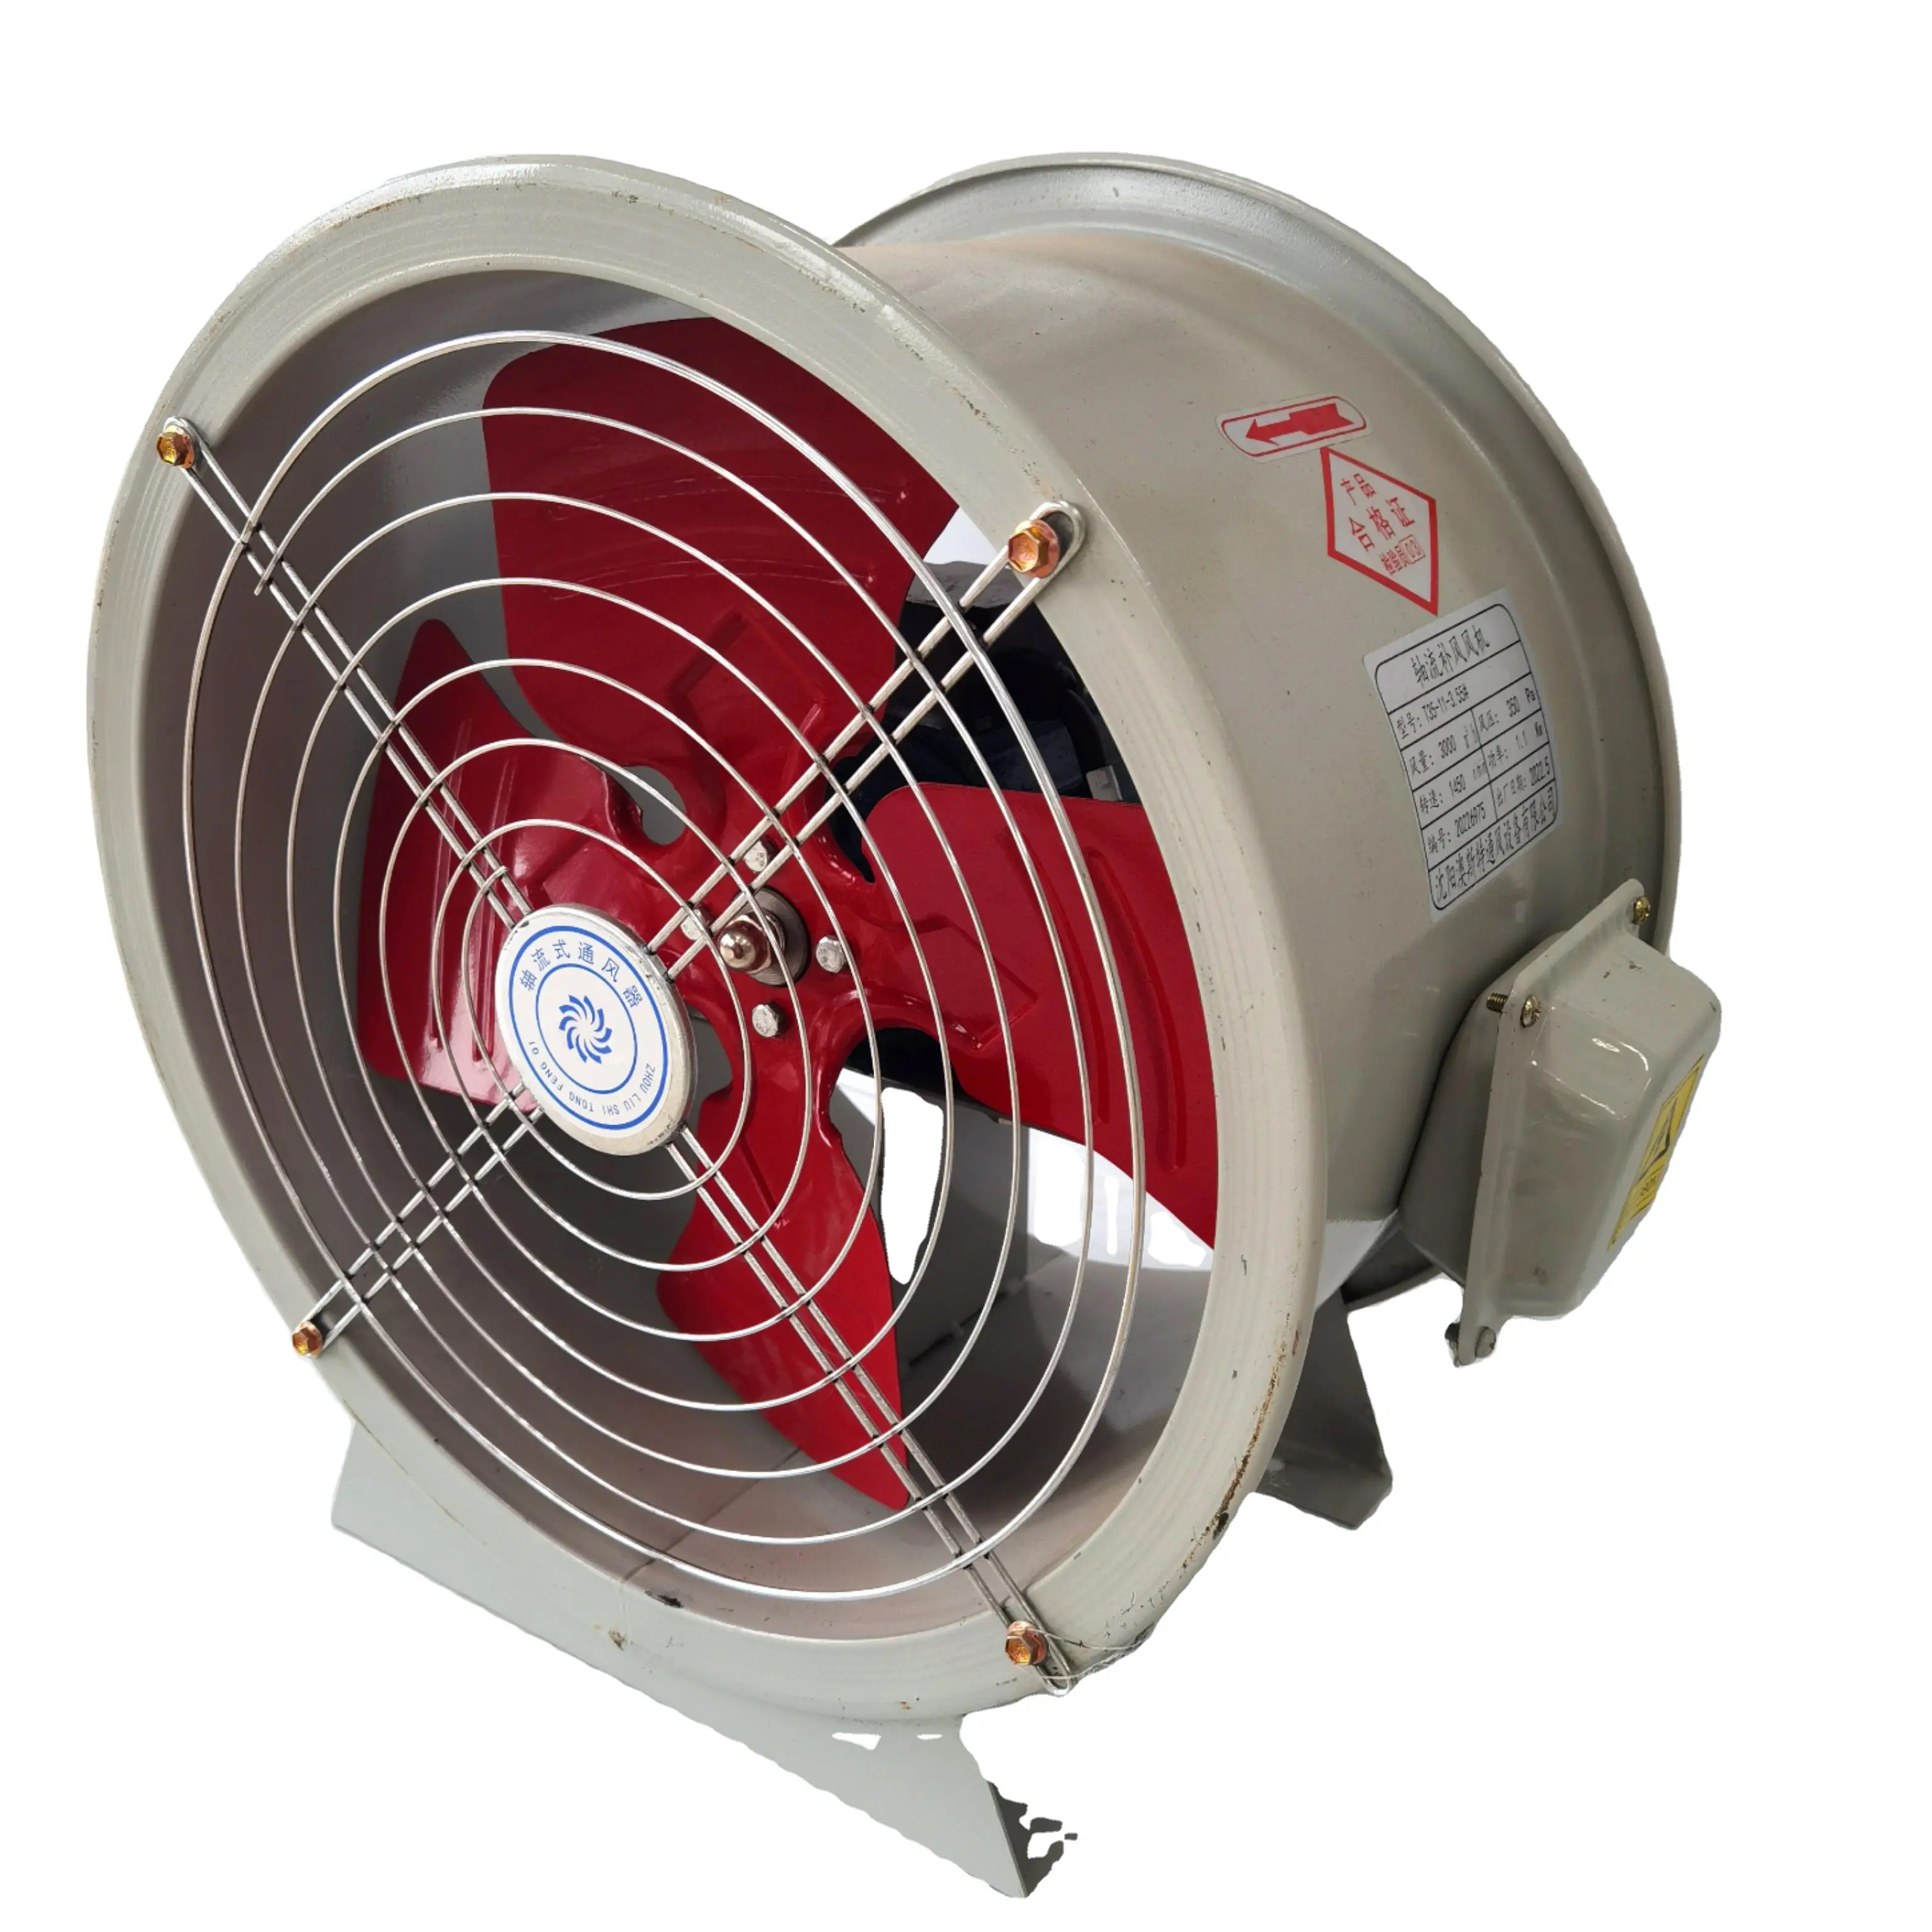 Portable Industrial Exhaust Fans Blowers for Paint Spray Booth